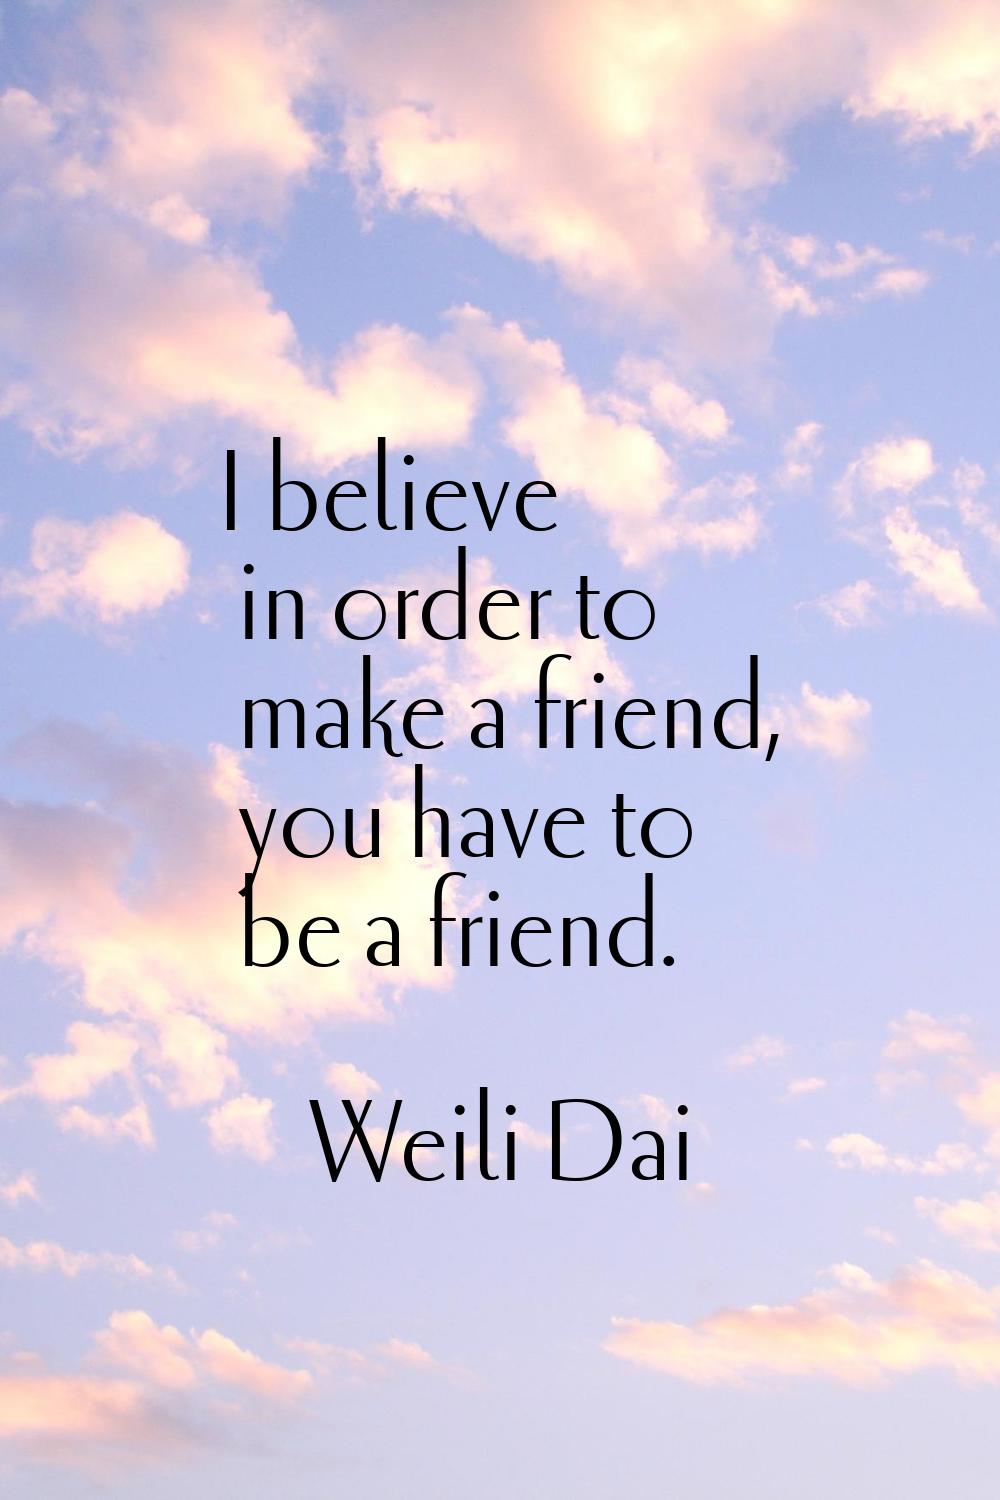 I believe in order to make a friend, you have to be a friend.